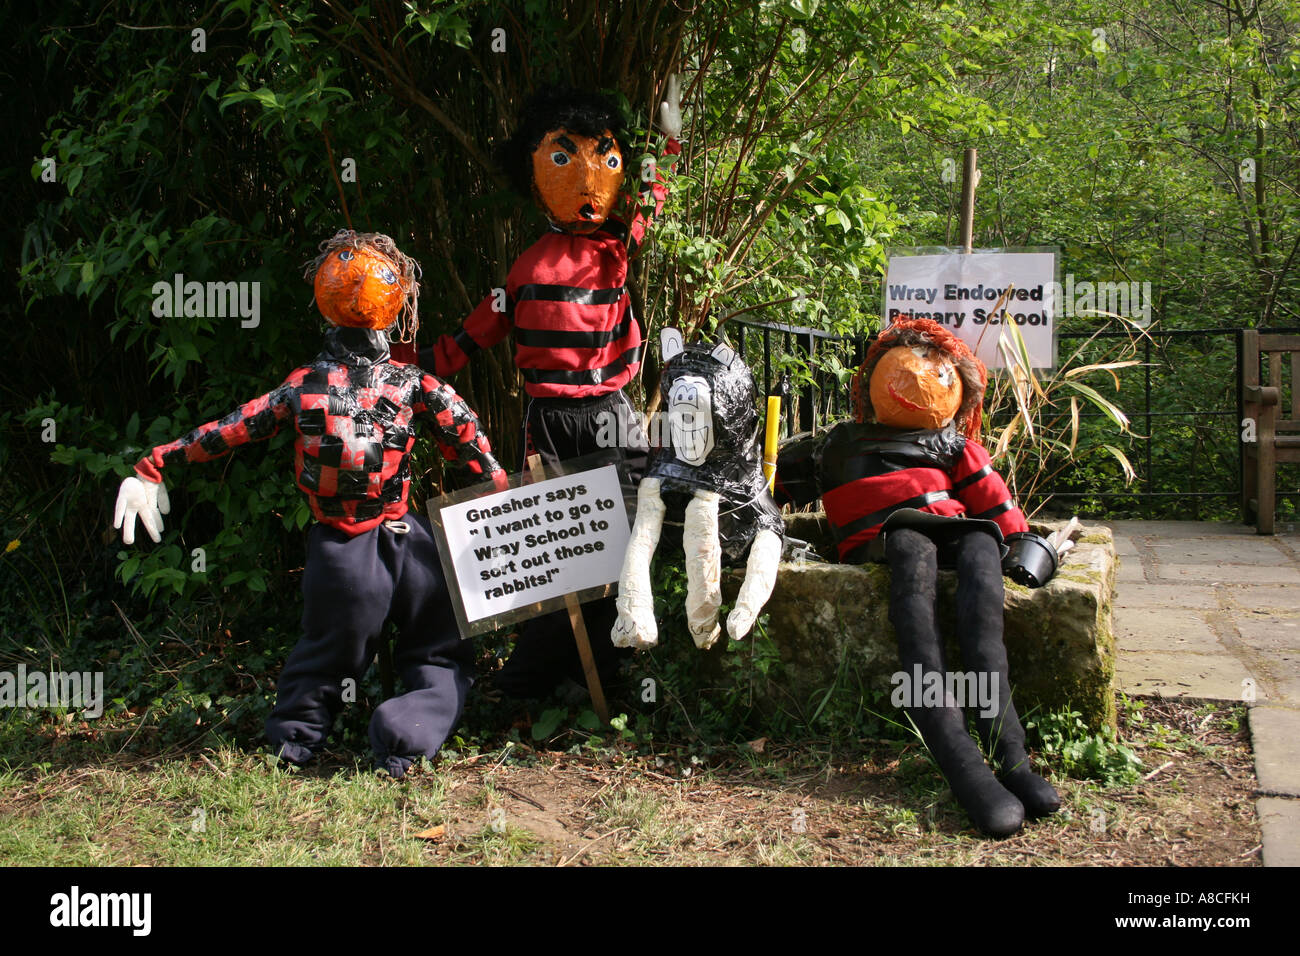 Dennis the Menace, Gnasher and friends at Wray Scarecrow Festival, Wray village, Lancashire, England. Stock Photo